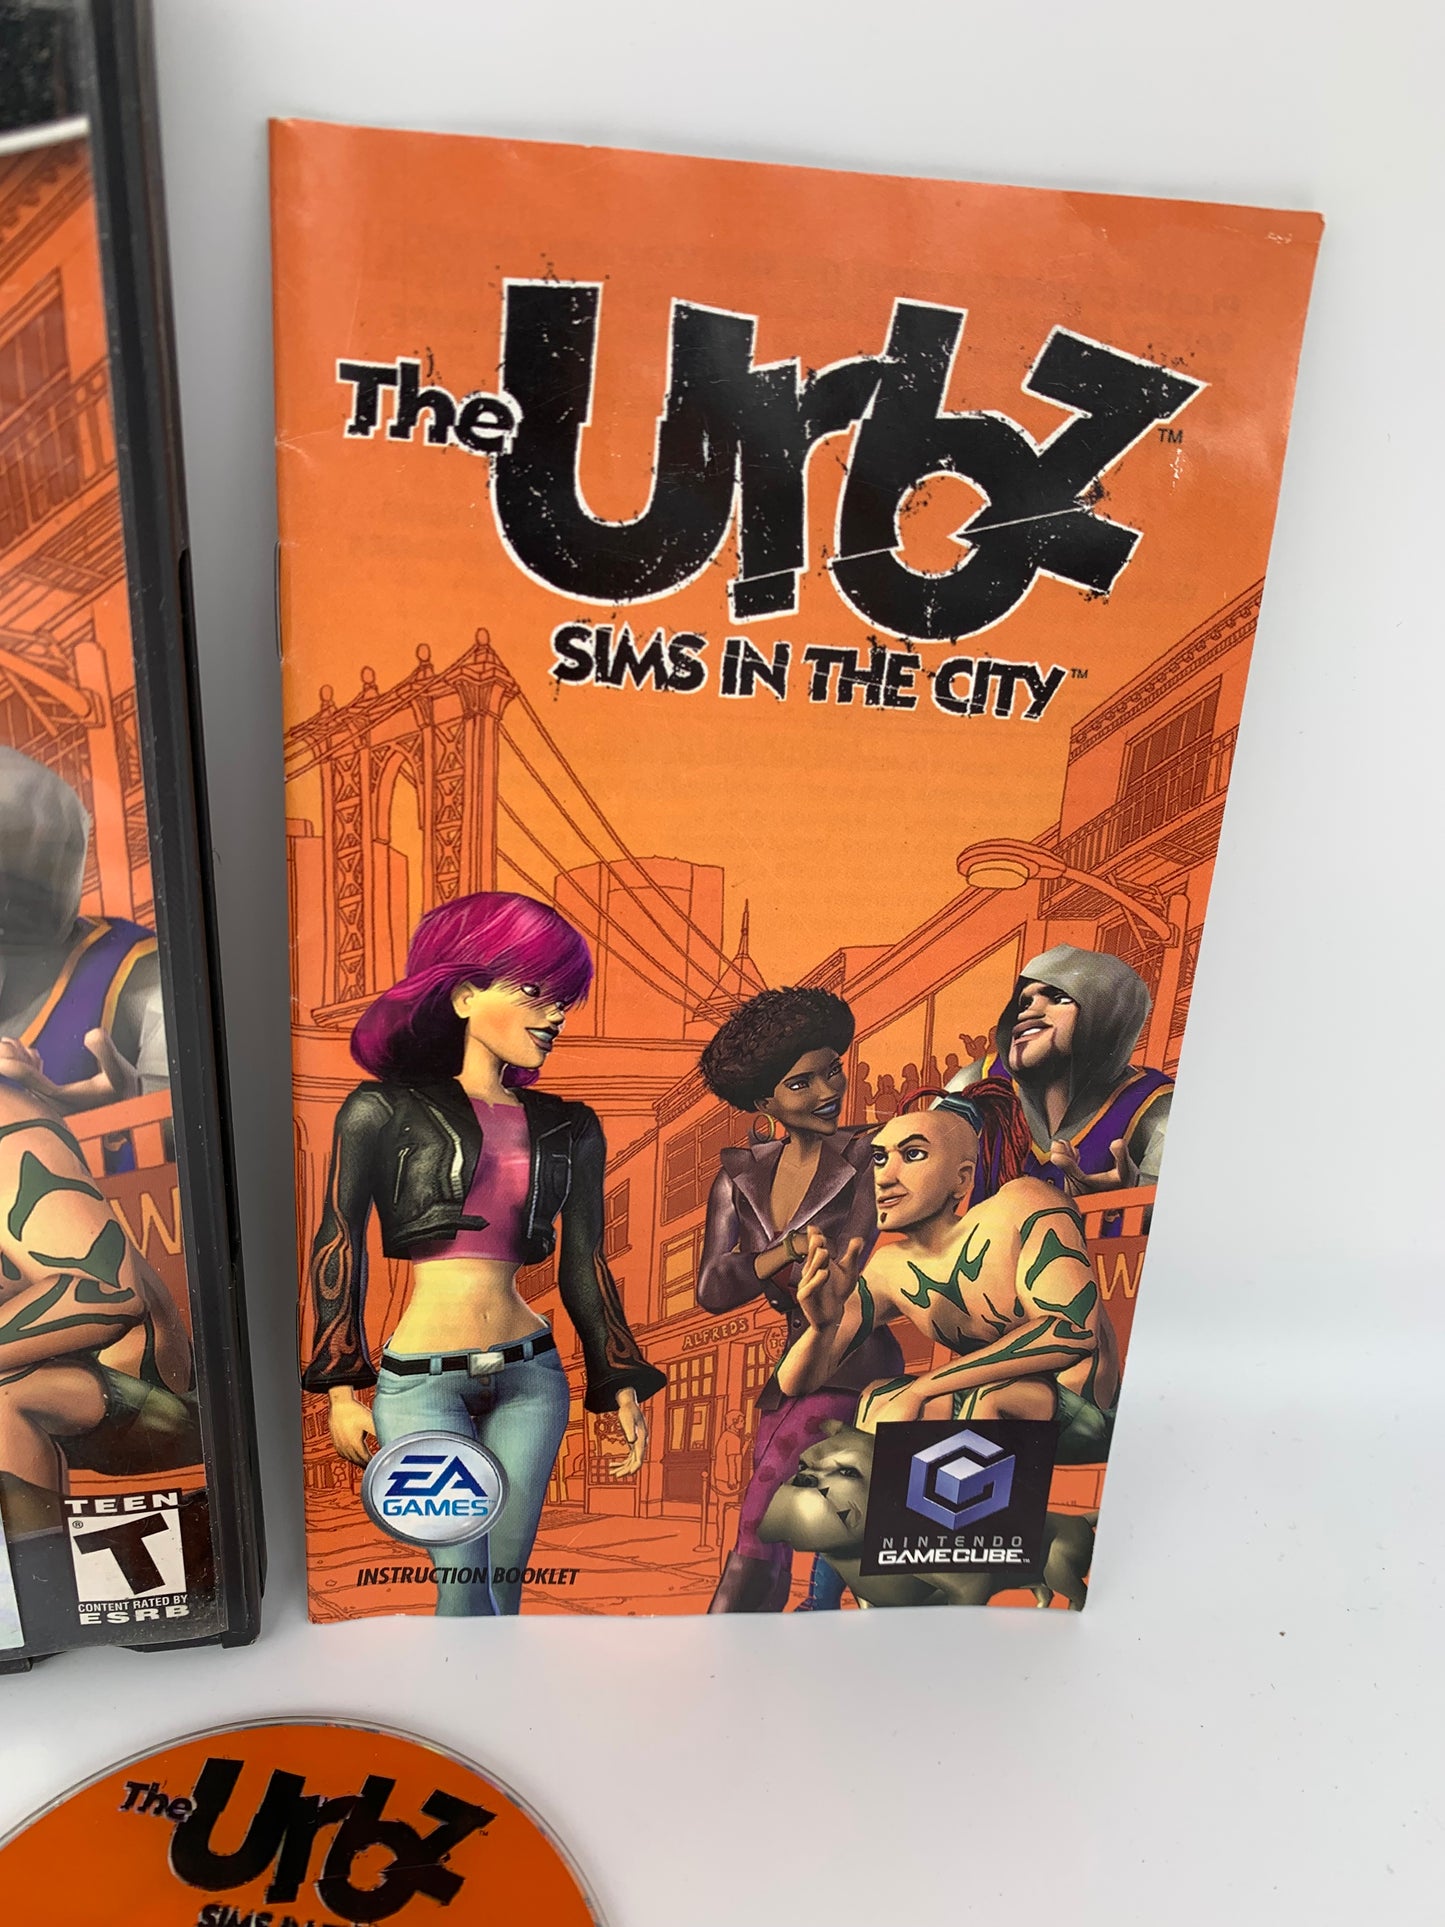 NiNTENDO GAMECUBE [NGC] | THE URBZ SiMS iN THE CiTY